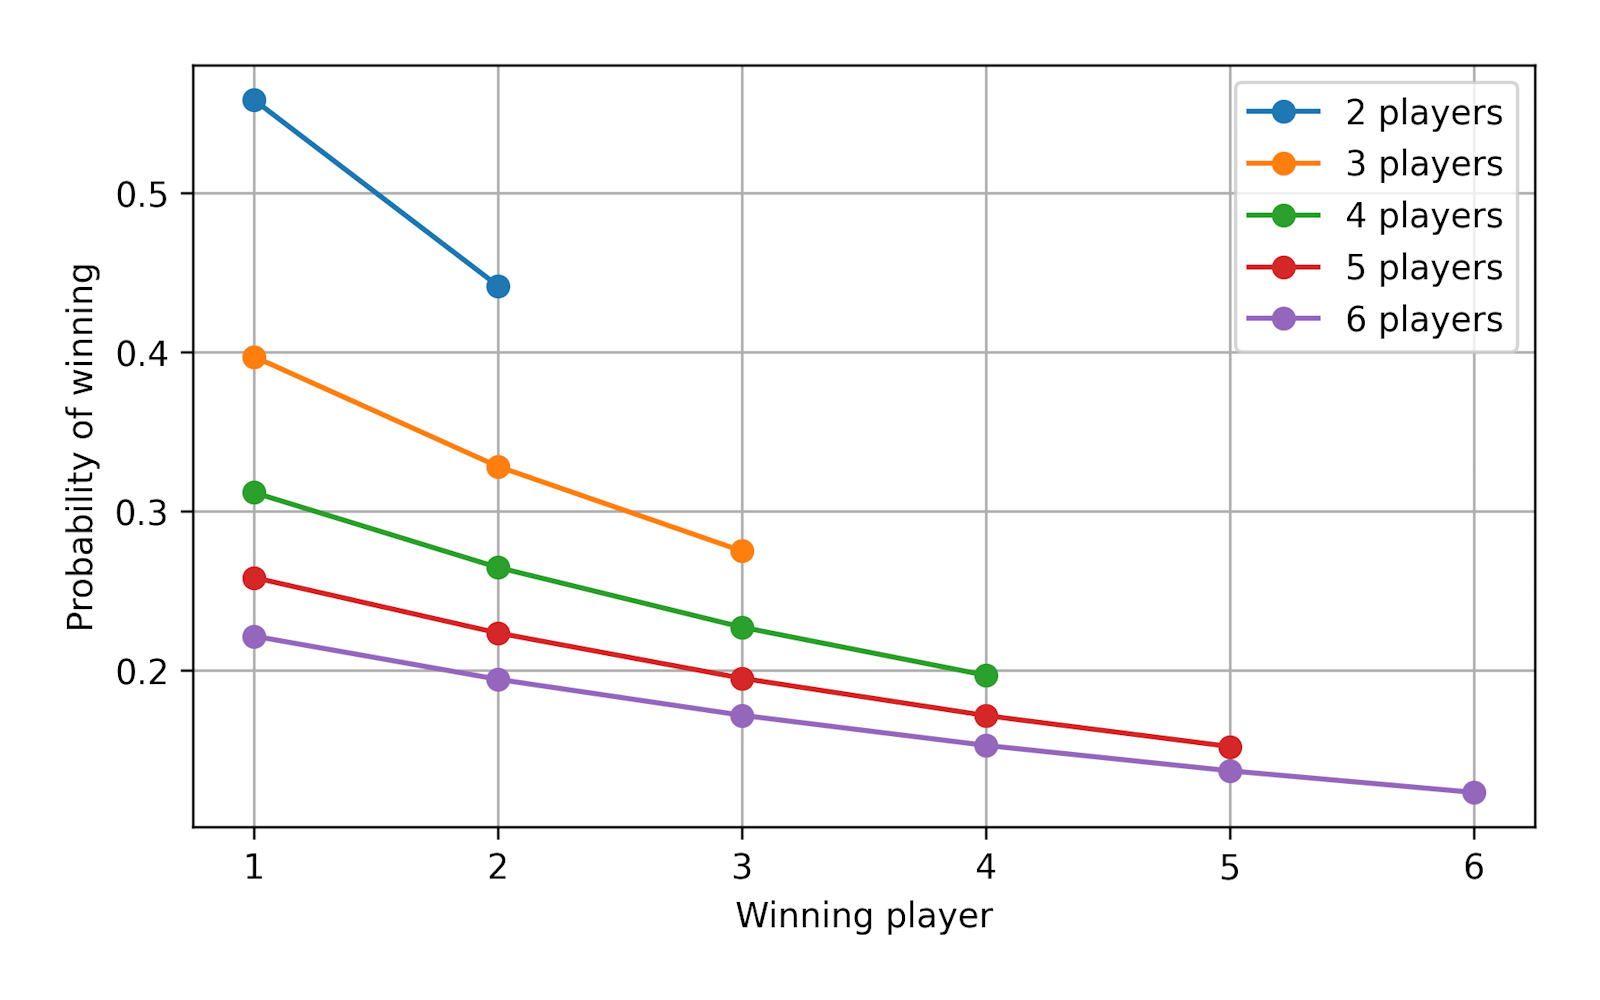 Probability of winning for each player